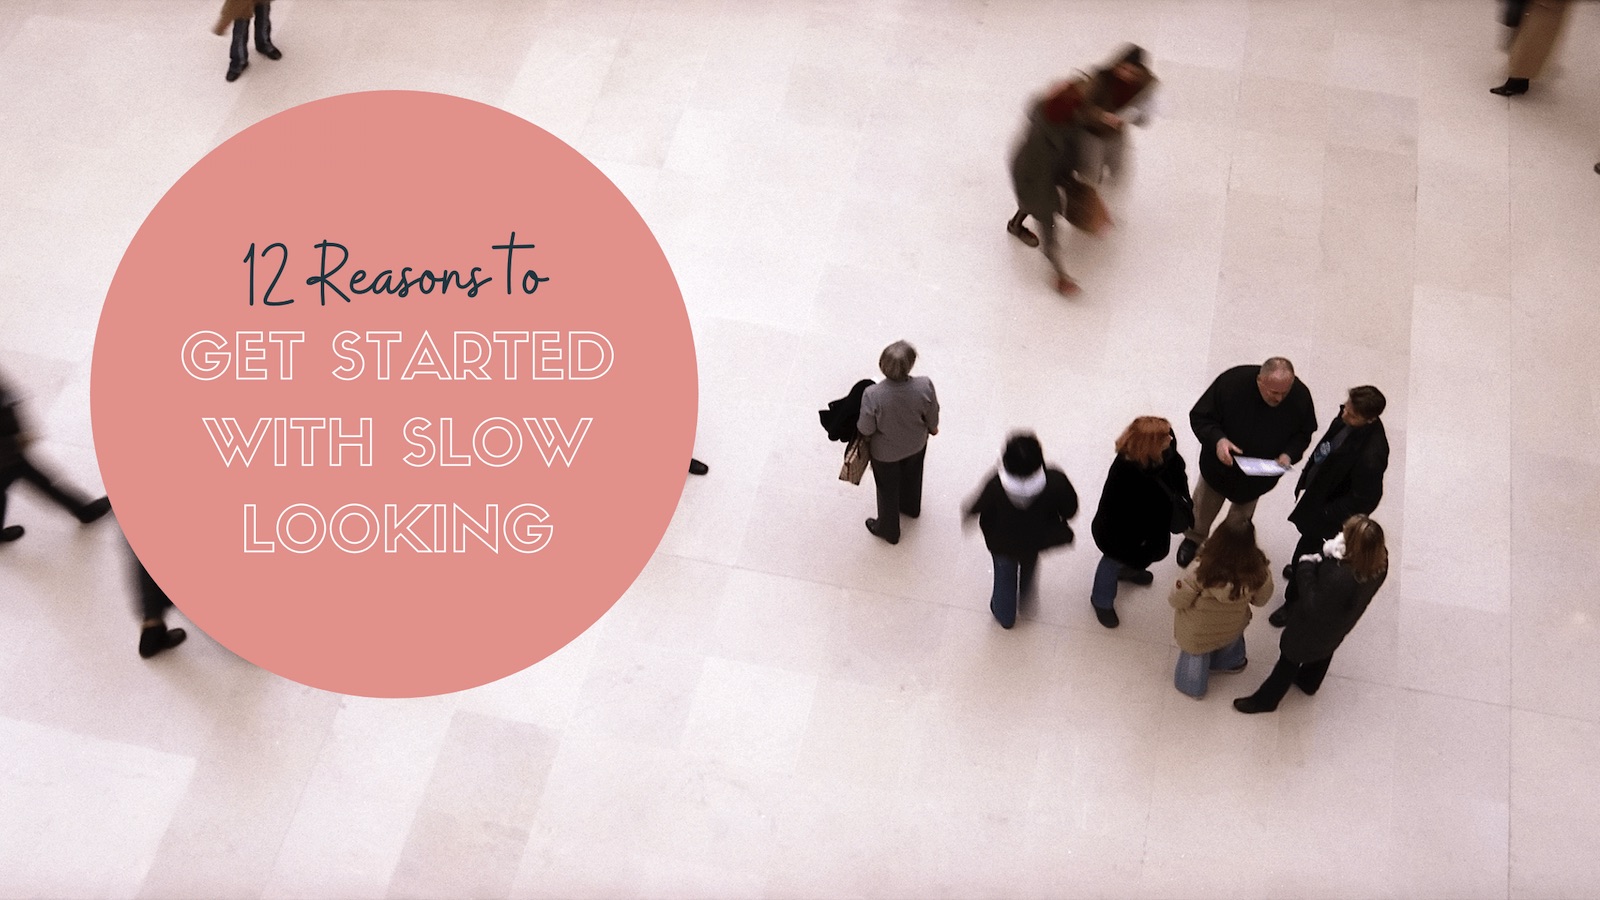 12 Reasons to Get Started with Slow Looking